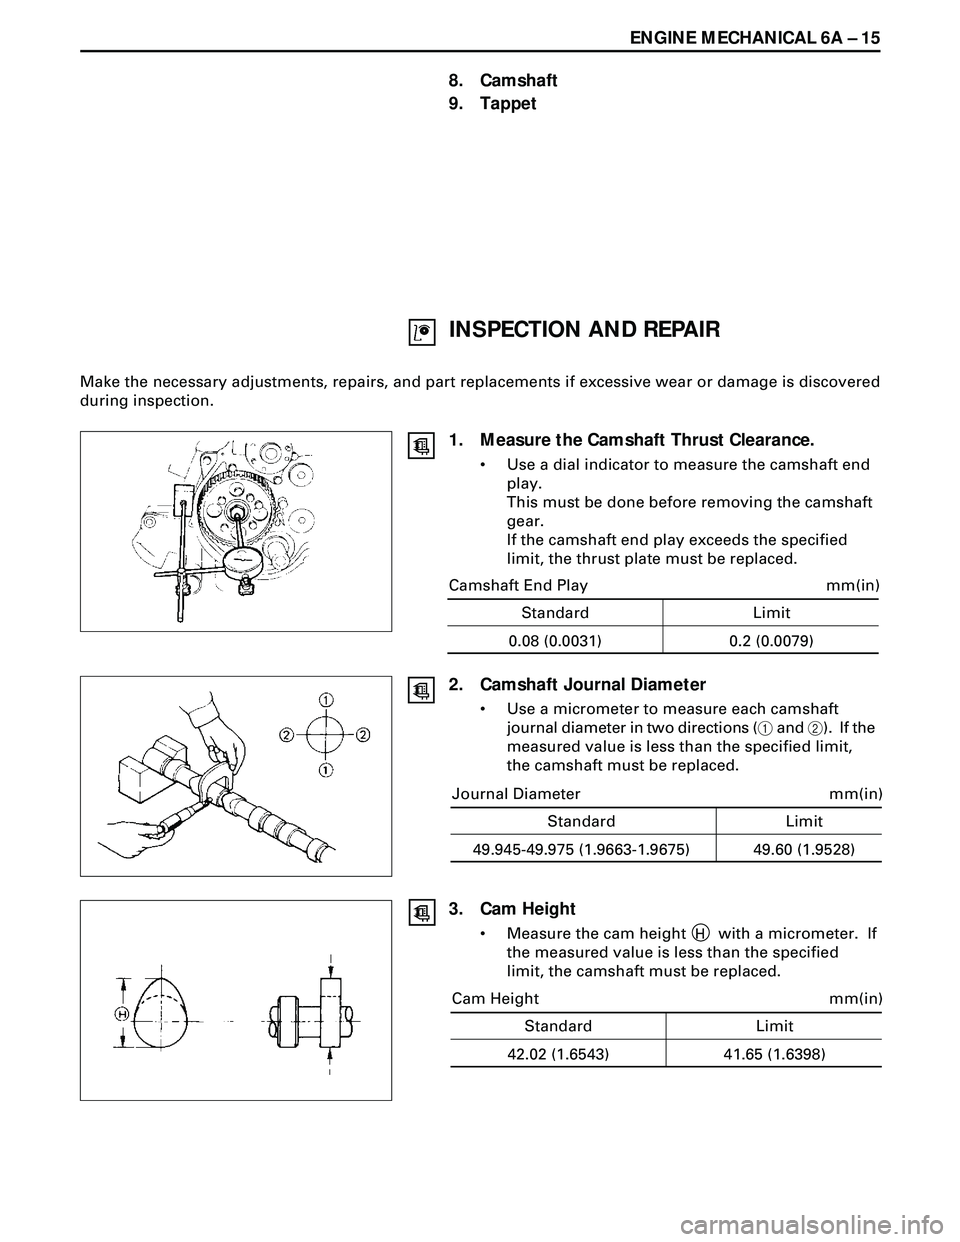 ISUZU TROOPER 1998  Service Repair Manual ENGINE MECHANICAL 6A Ð 15
INSPECTION AND REPAIR
Make the necessary adjustments, repairs, and part replacements if excessive wear or damage is discovered
during inspection.
8. Camshaft
9. Tappet
1. Me